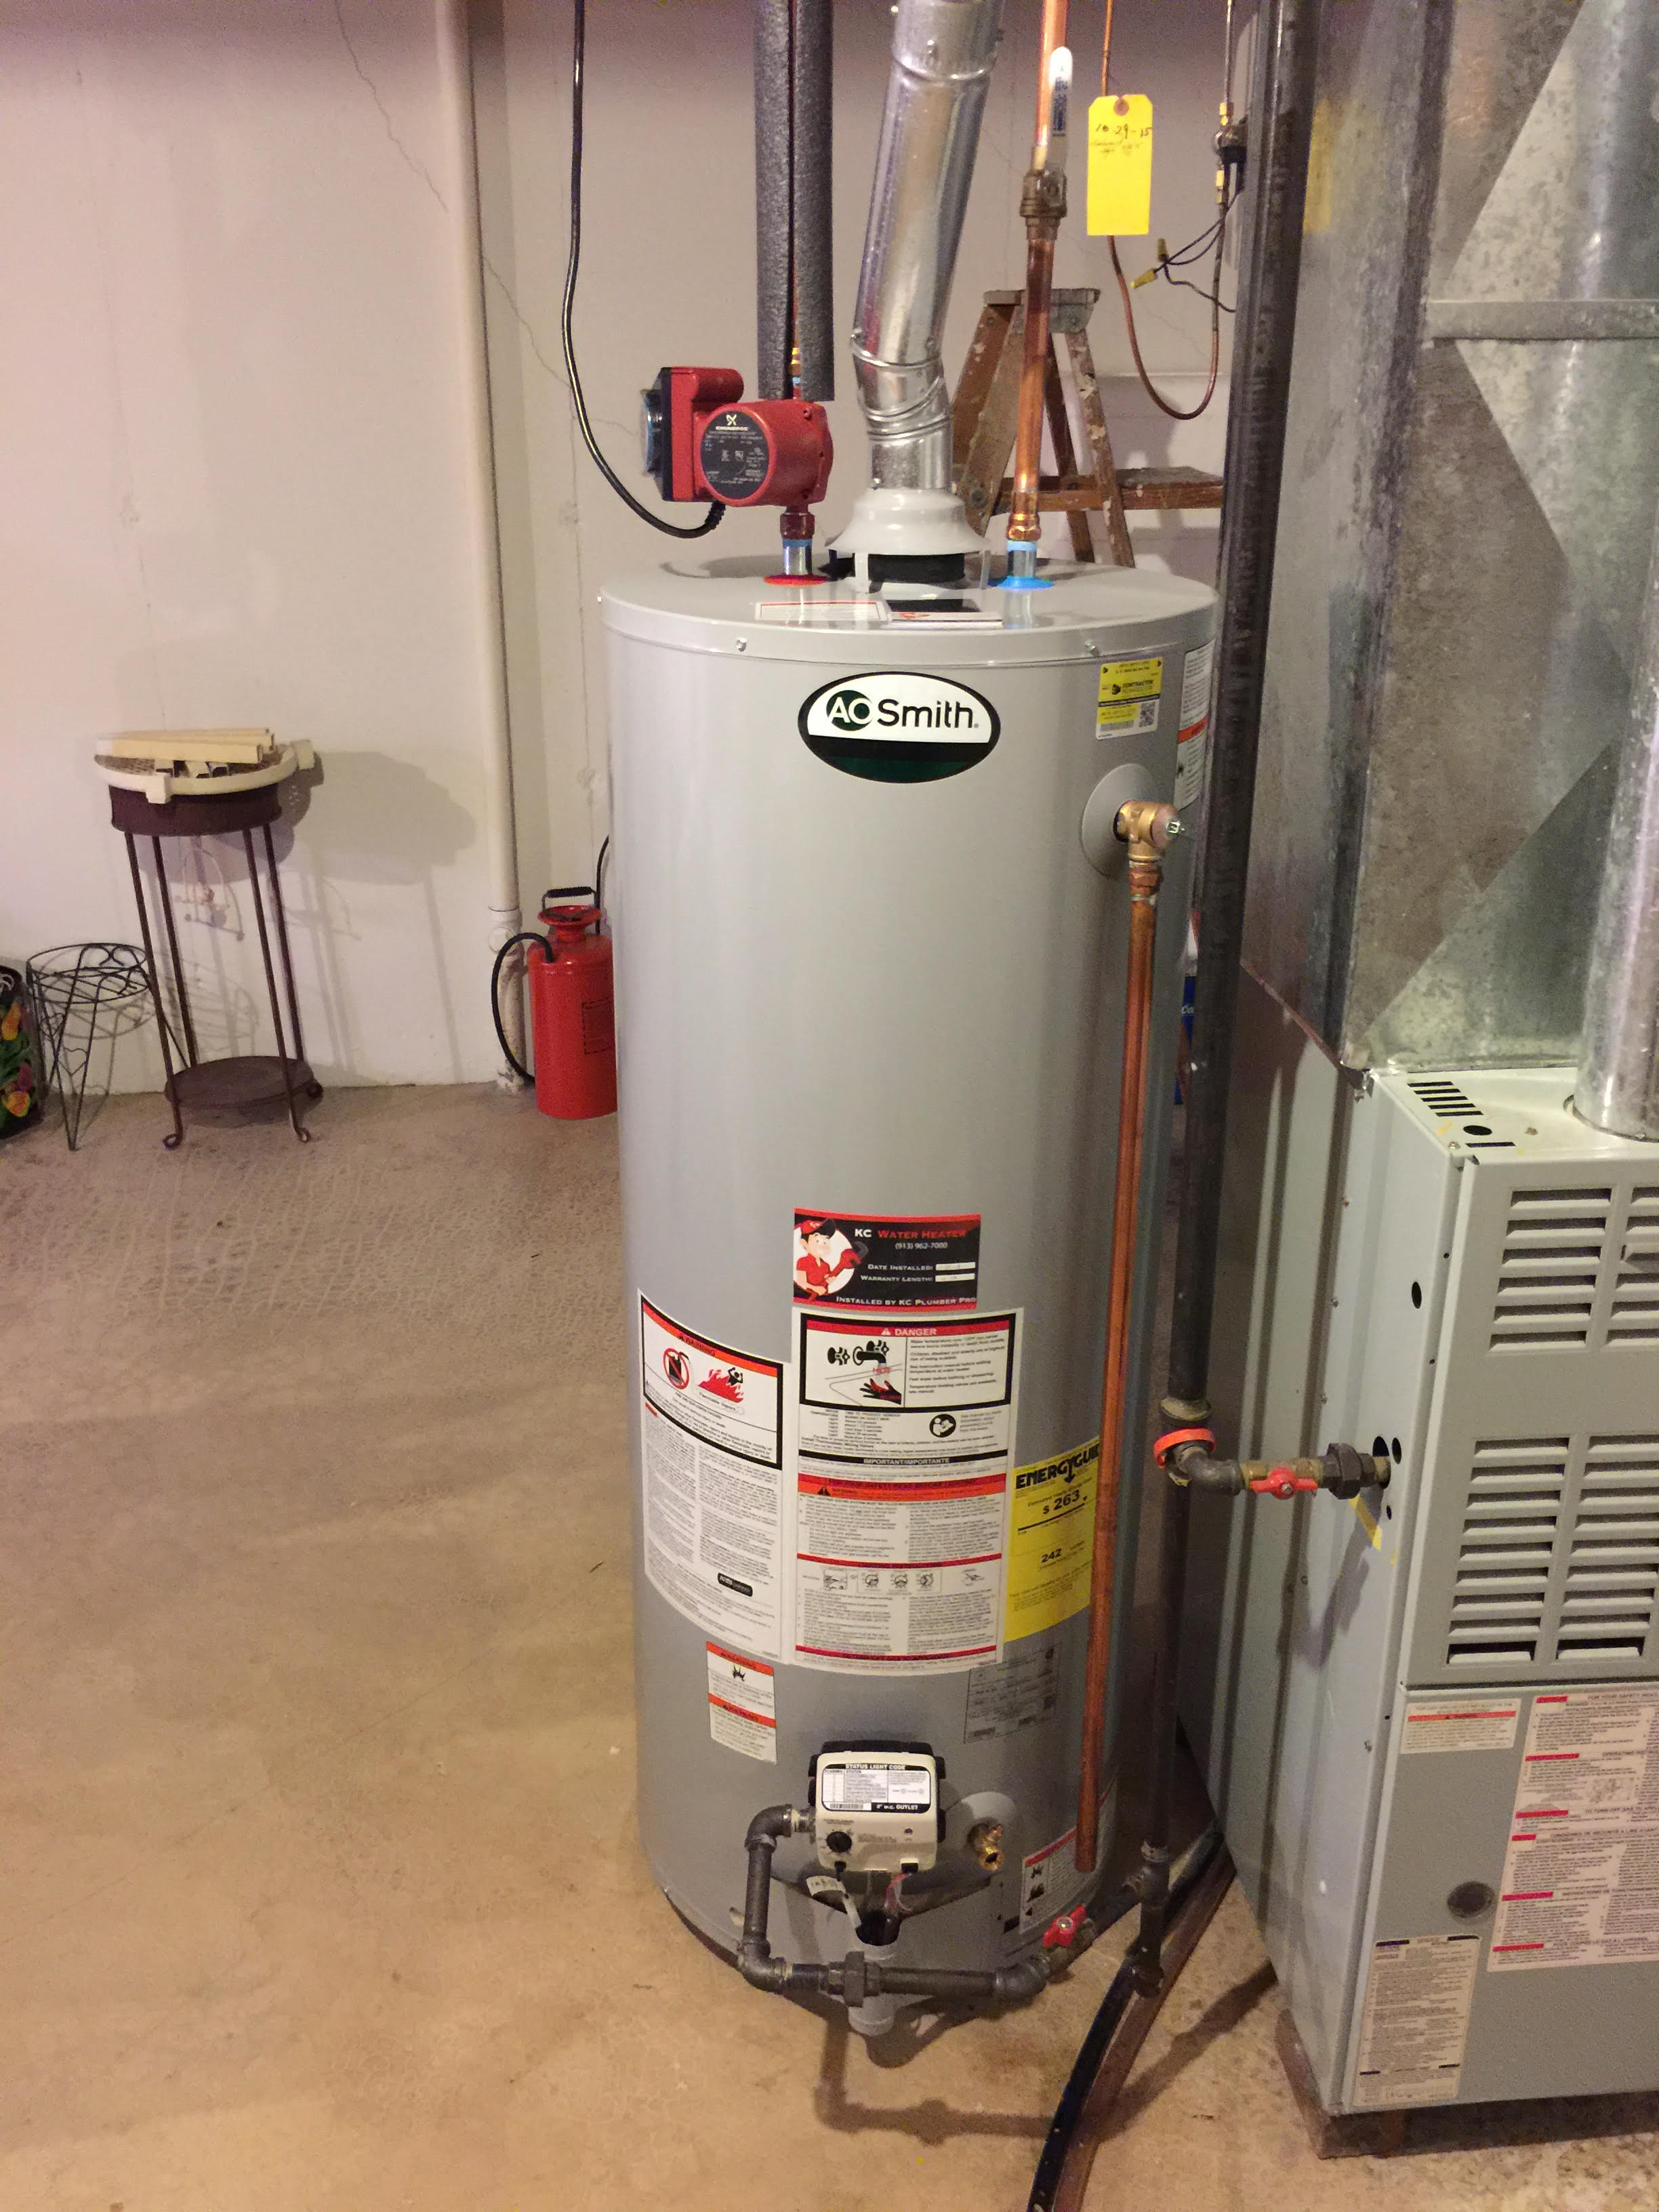 GPR50400 AO Smith efficient water heater - Water Heaters Installed by Licensed Plumber